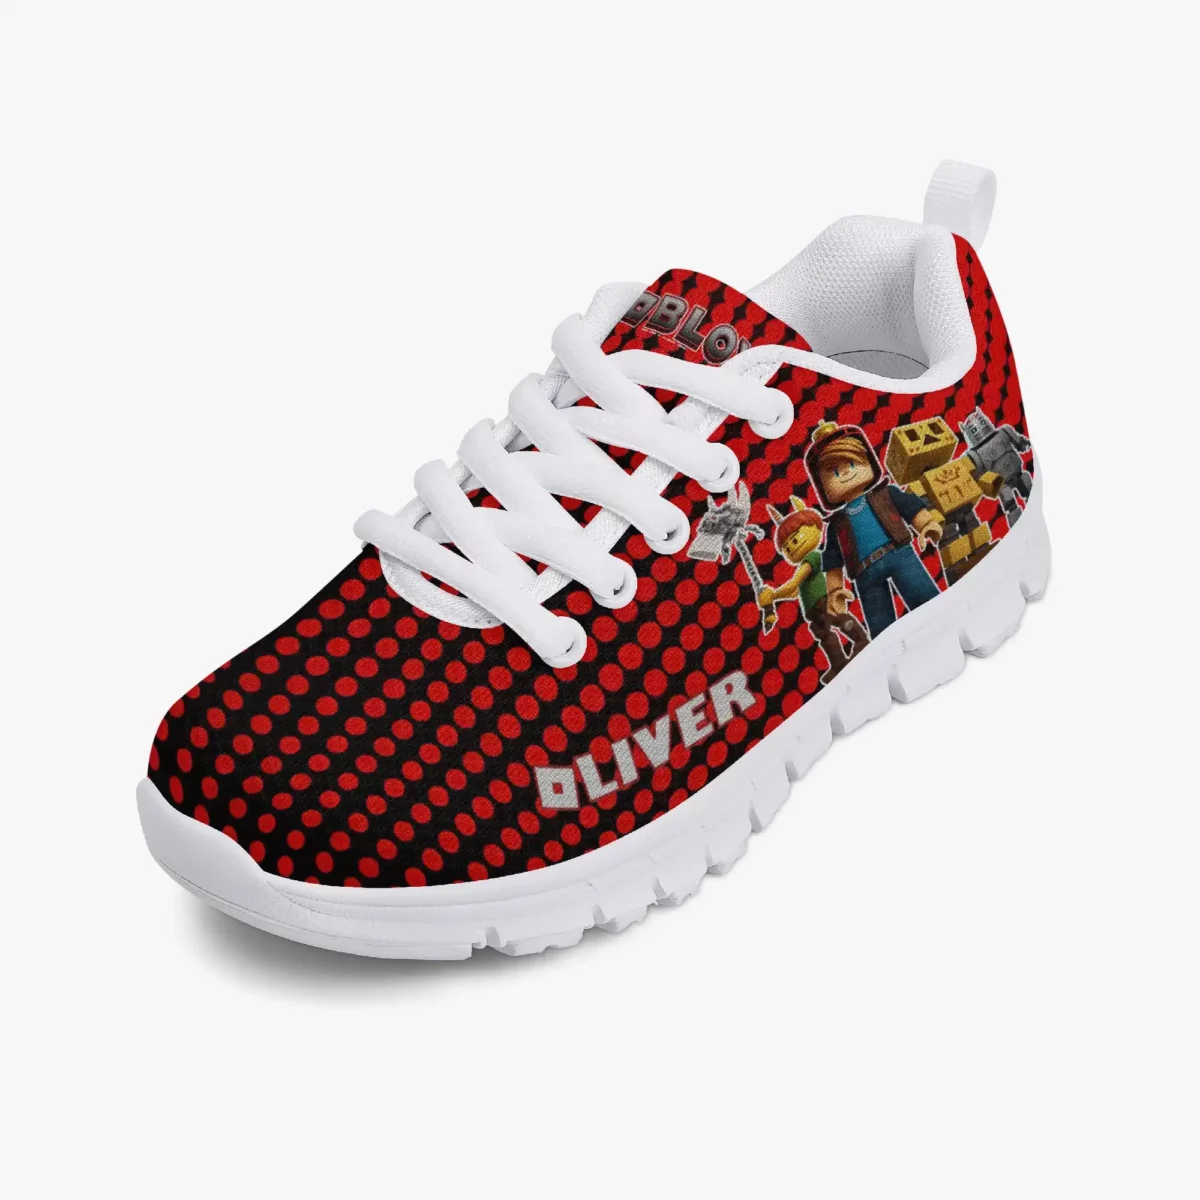 Personalized Roblox Video Game Red Shoes for Boys Lightweight Mesh Blue Sneakers Cool Kiddo 16